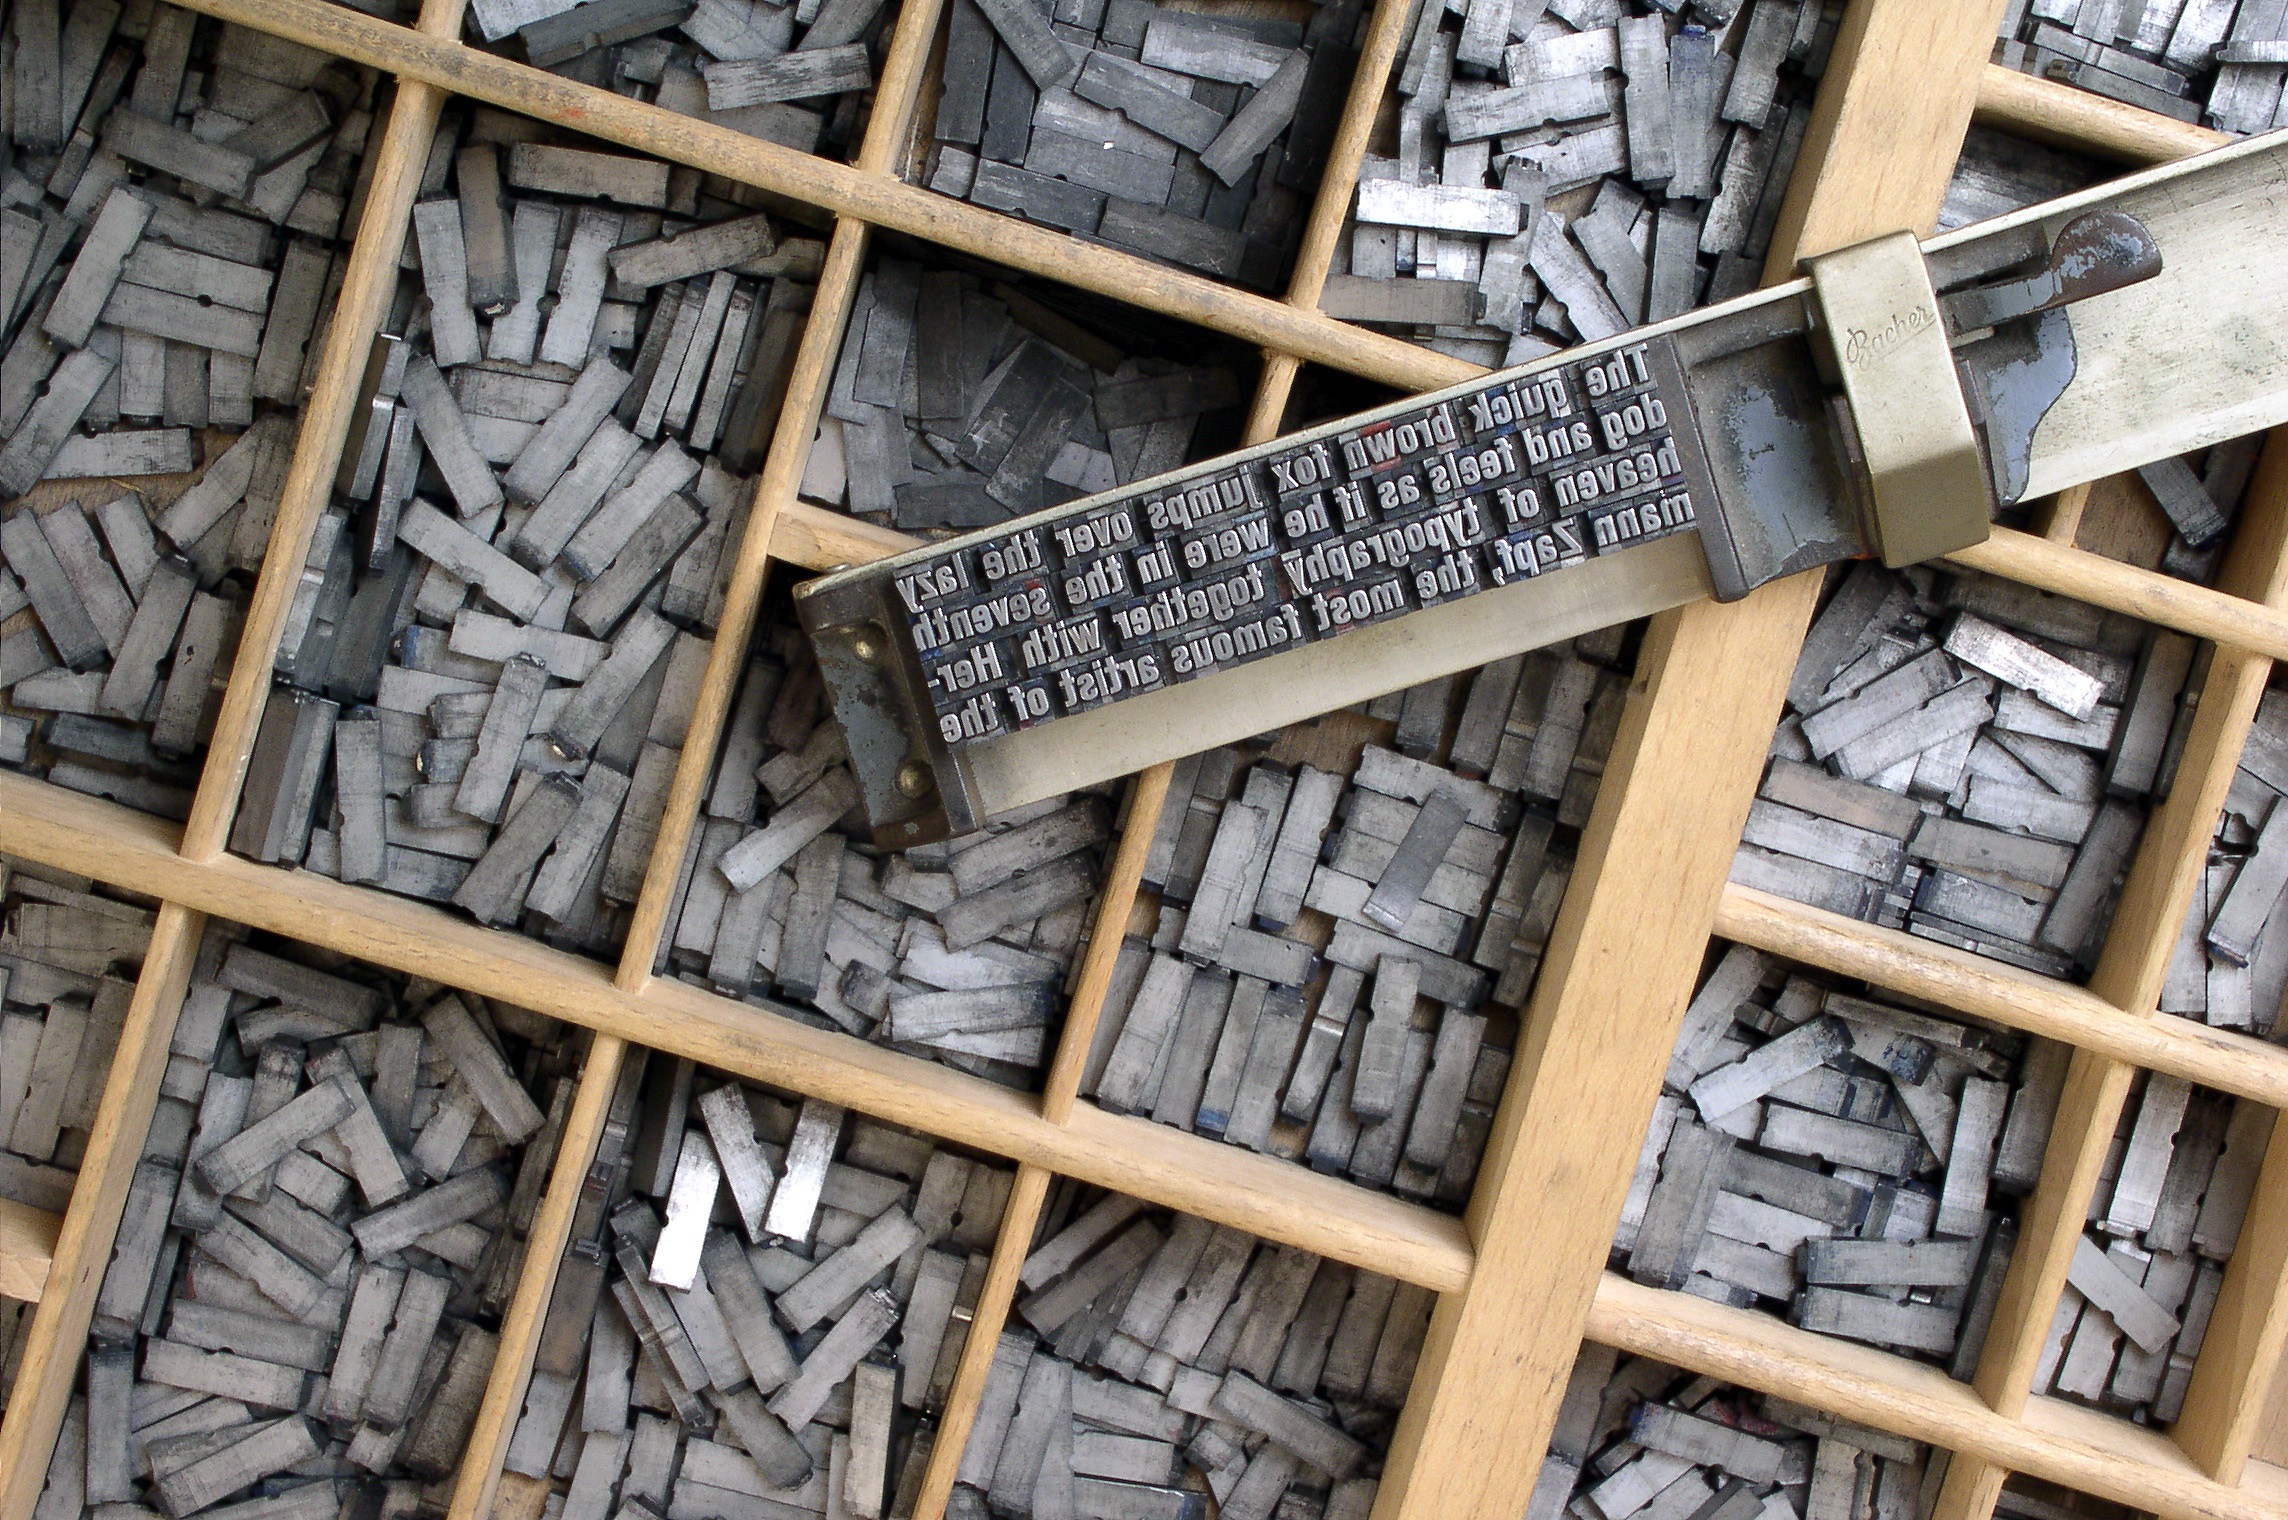 It’s probably something you don’t think about. But the words you are reading right now are written in a “typeface.” The letters are produced in a particular style—and hopefully the typeface is easy to read. Tens of thousands of typefaces exist today, but they are all inventions that originated with the early movable type of the Renaissance.  (Image via Wikipedia) 